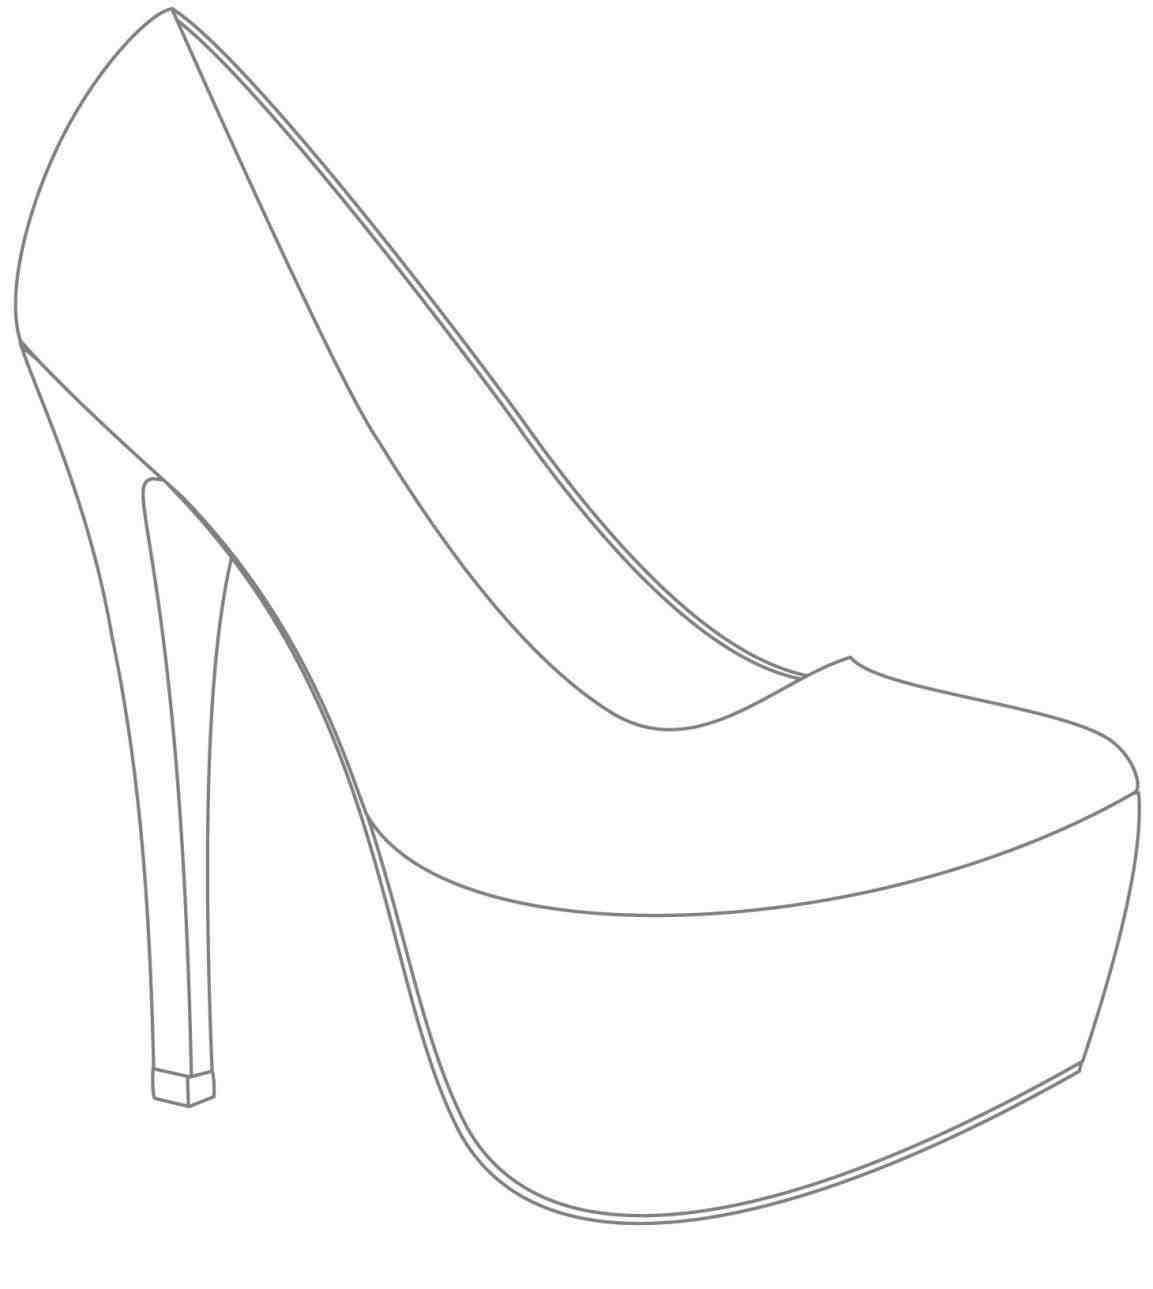 High Heel Drawing Template At Paintingvalley | Explore Throughout High Heel Template For Cards